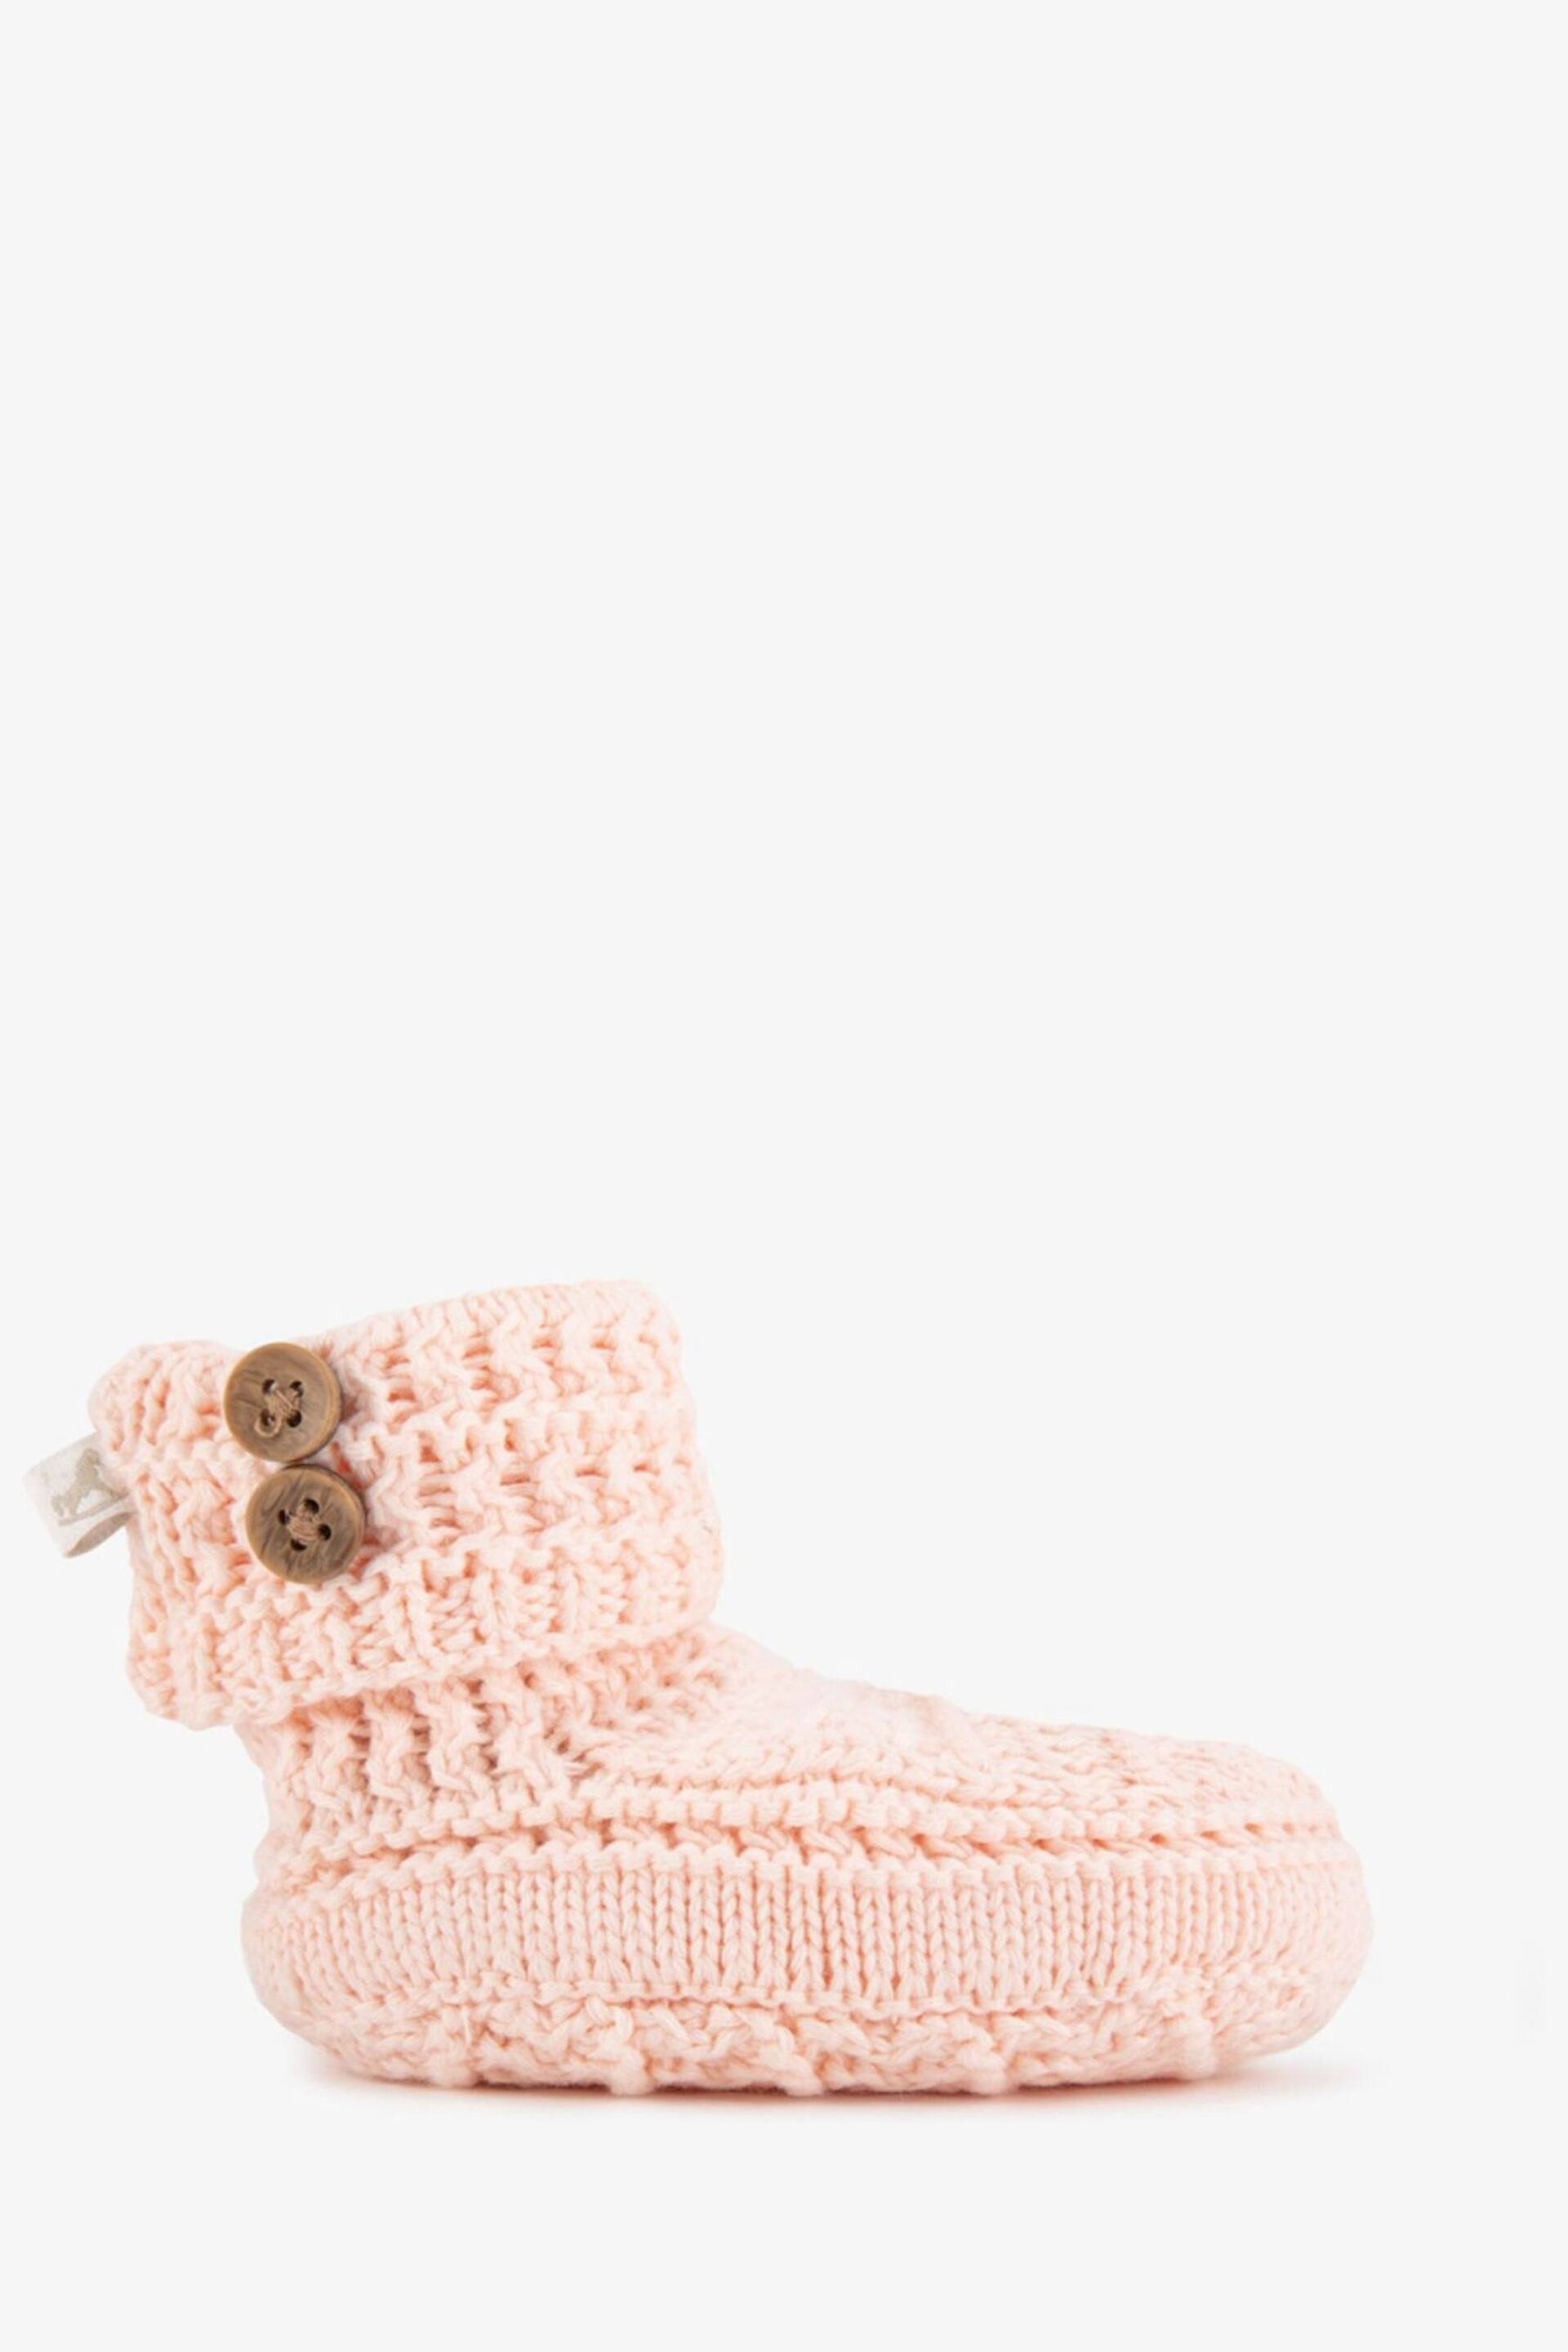 The Little Tailor Baby Pink Soft Knitted Booties - Image 1 of 2